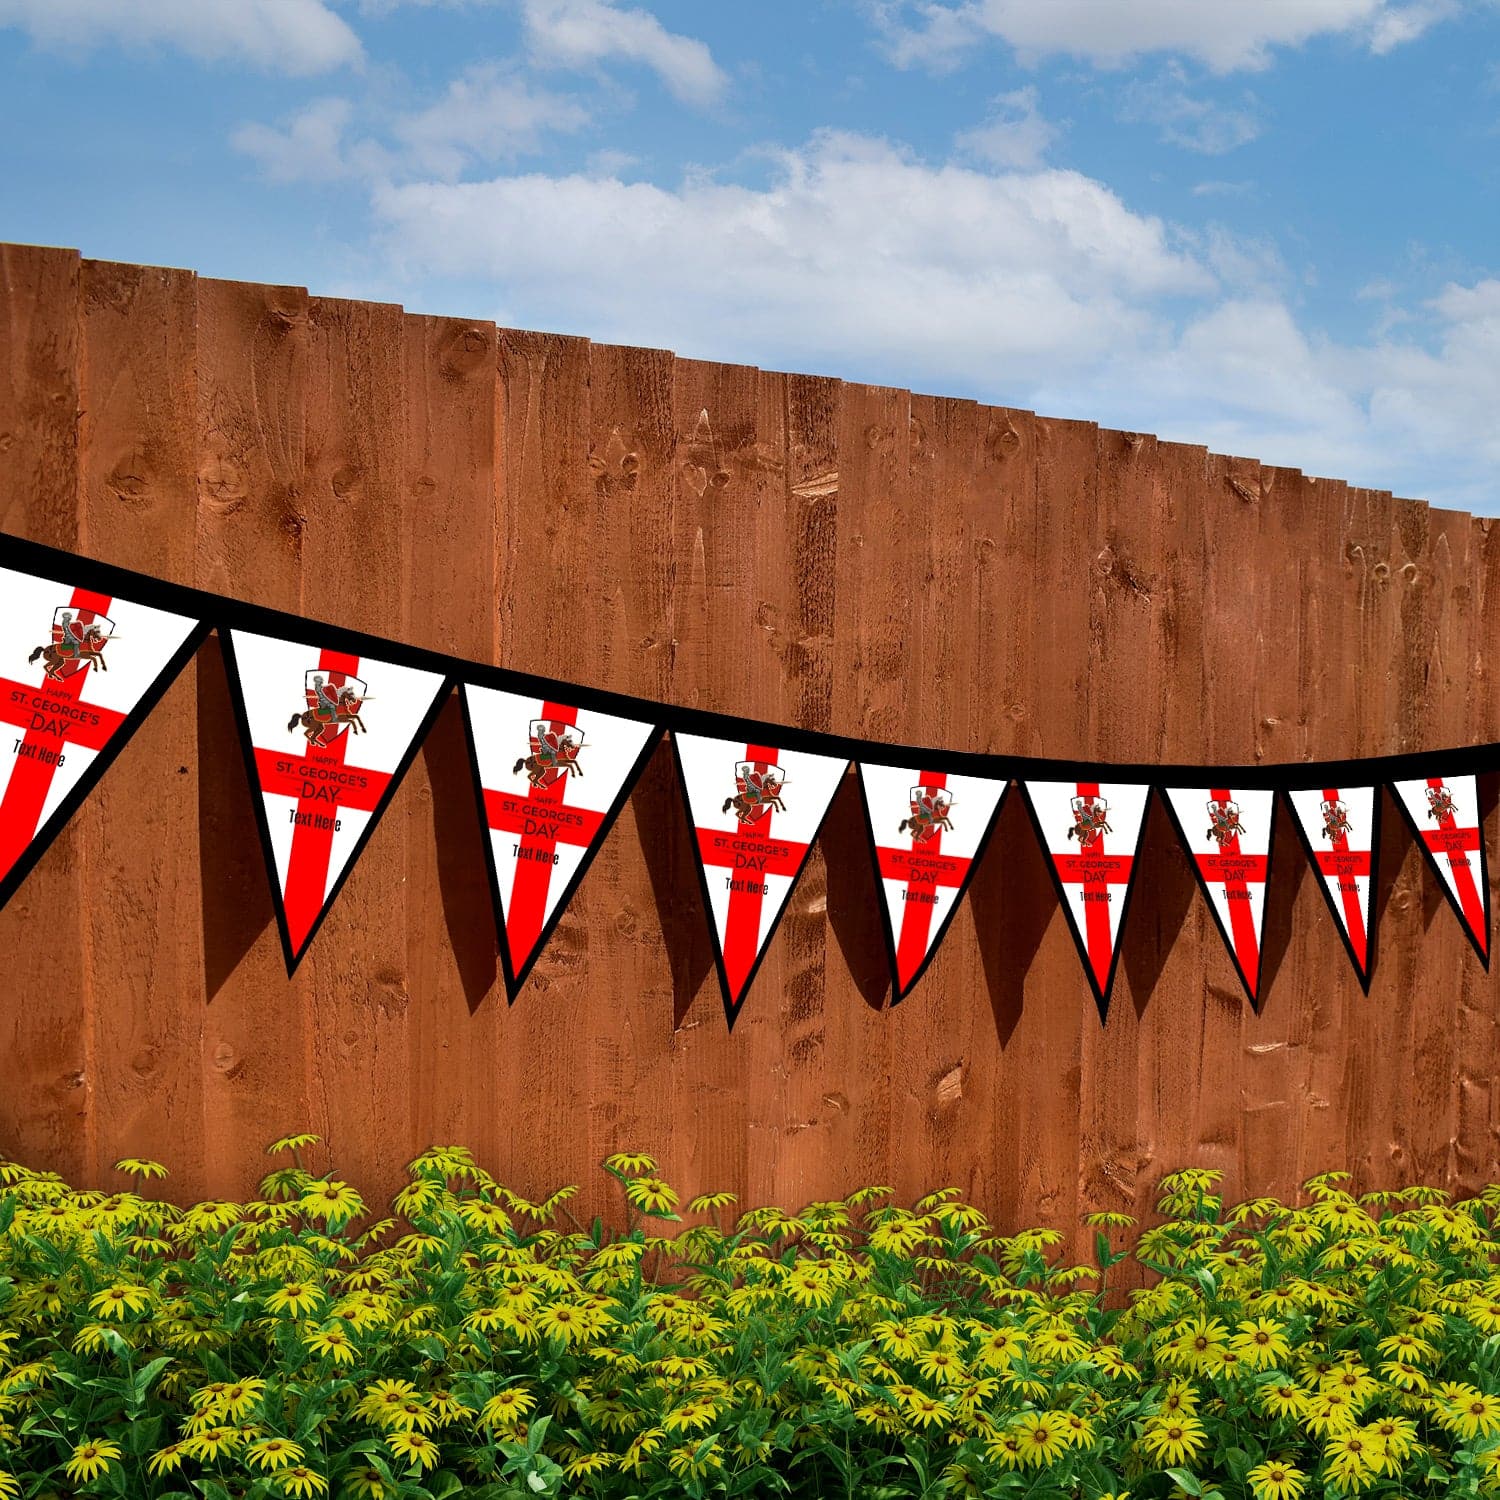 Personalised St George's Day - 3m Fabric Bunting With 15 Individual Triangles